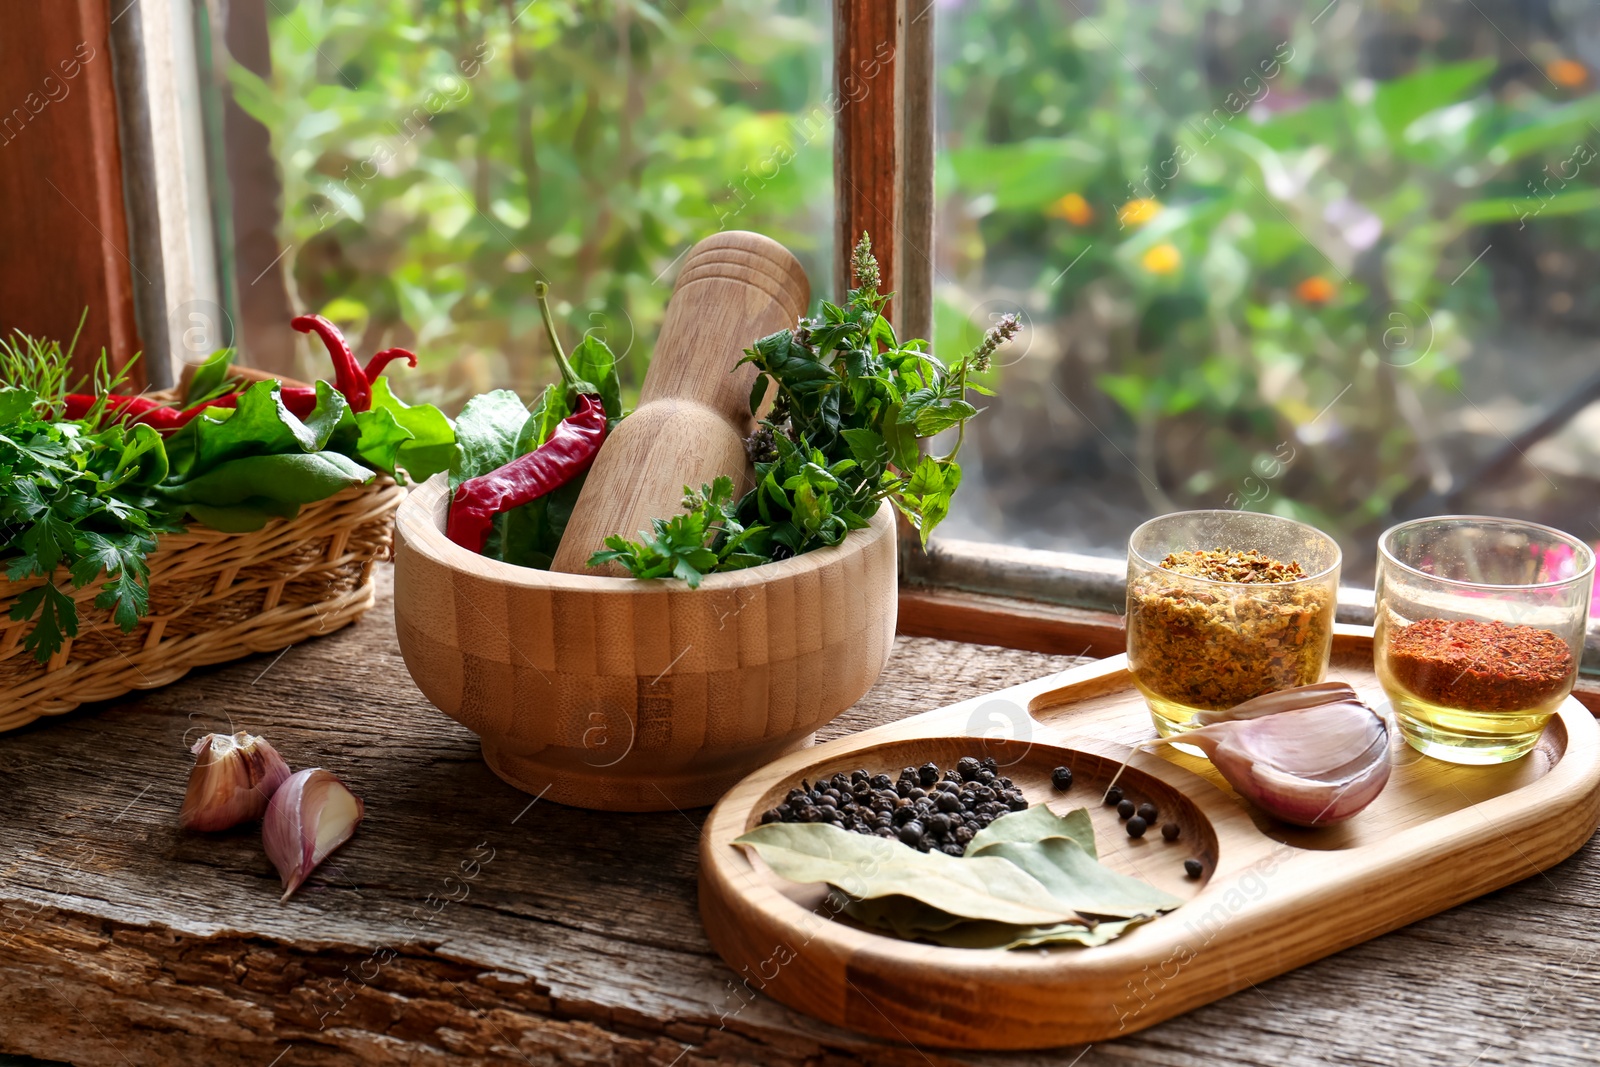 Photo of Mortar with pestle, fresh green herbs and different spices on wooden table near window